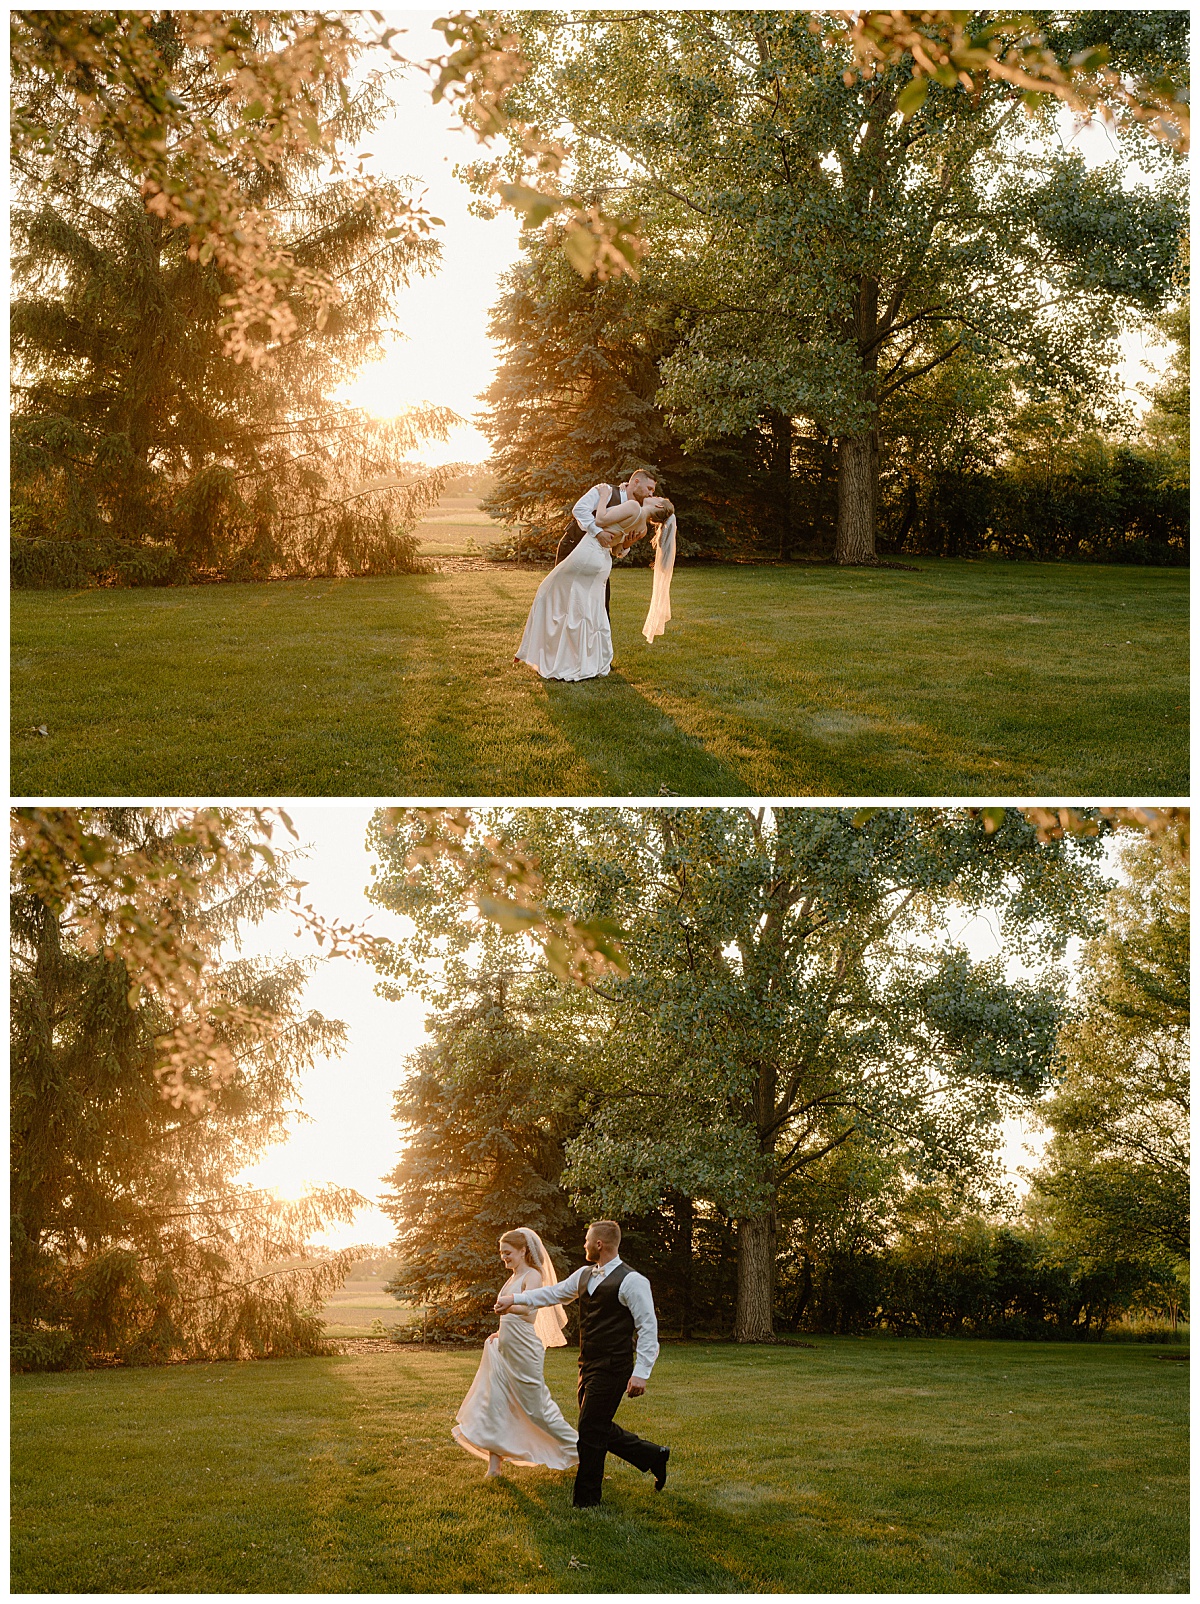 groom dips bride and kisses her as sun shines during golden hour by Indigo Lace Collective